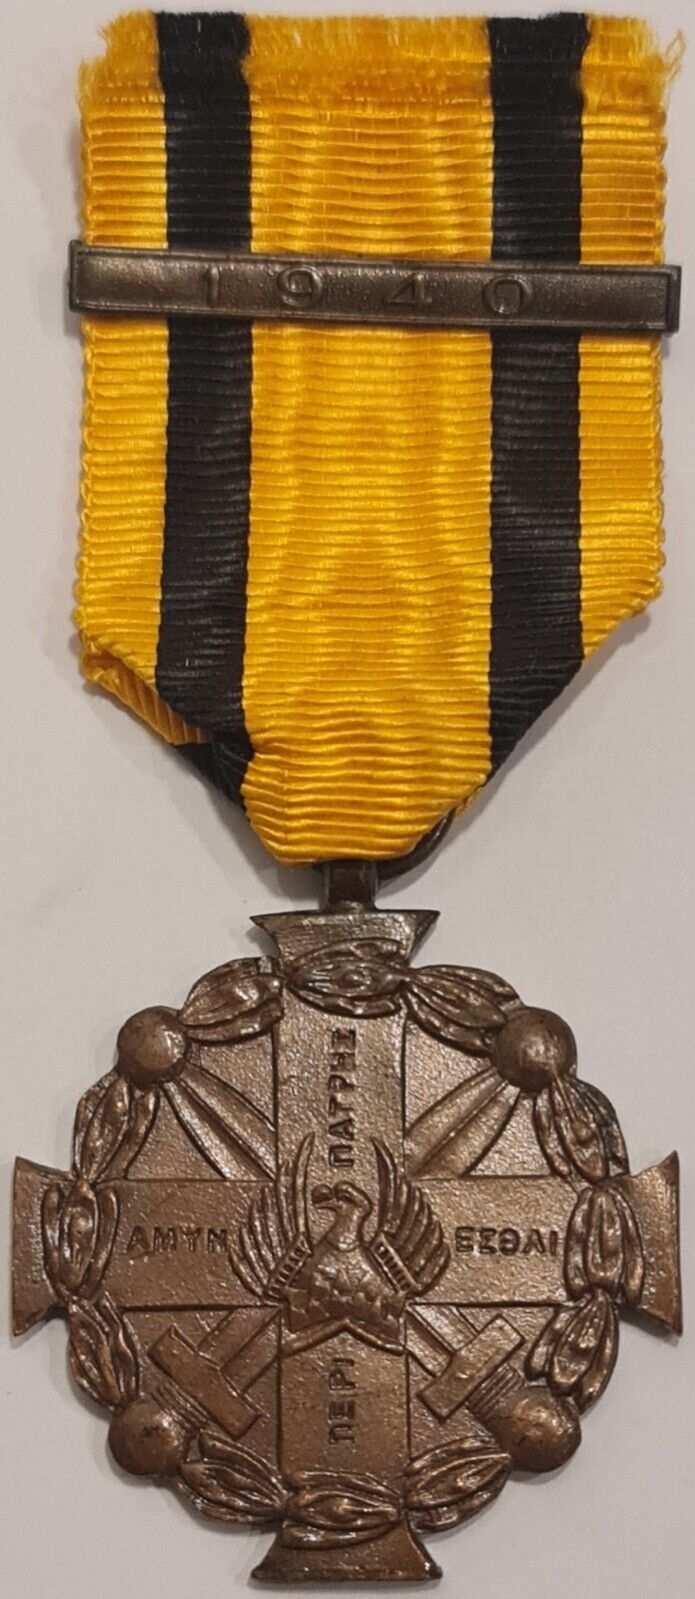 GREECE GREEK / WWI 1916-1917 Medal of Military Merit 4th Class 